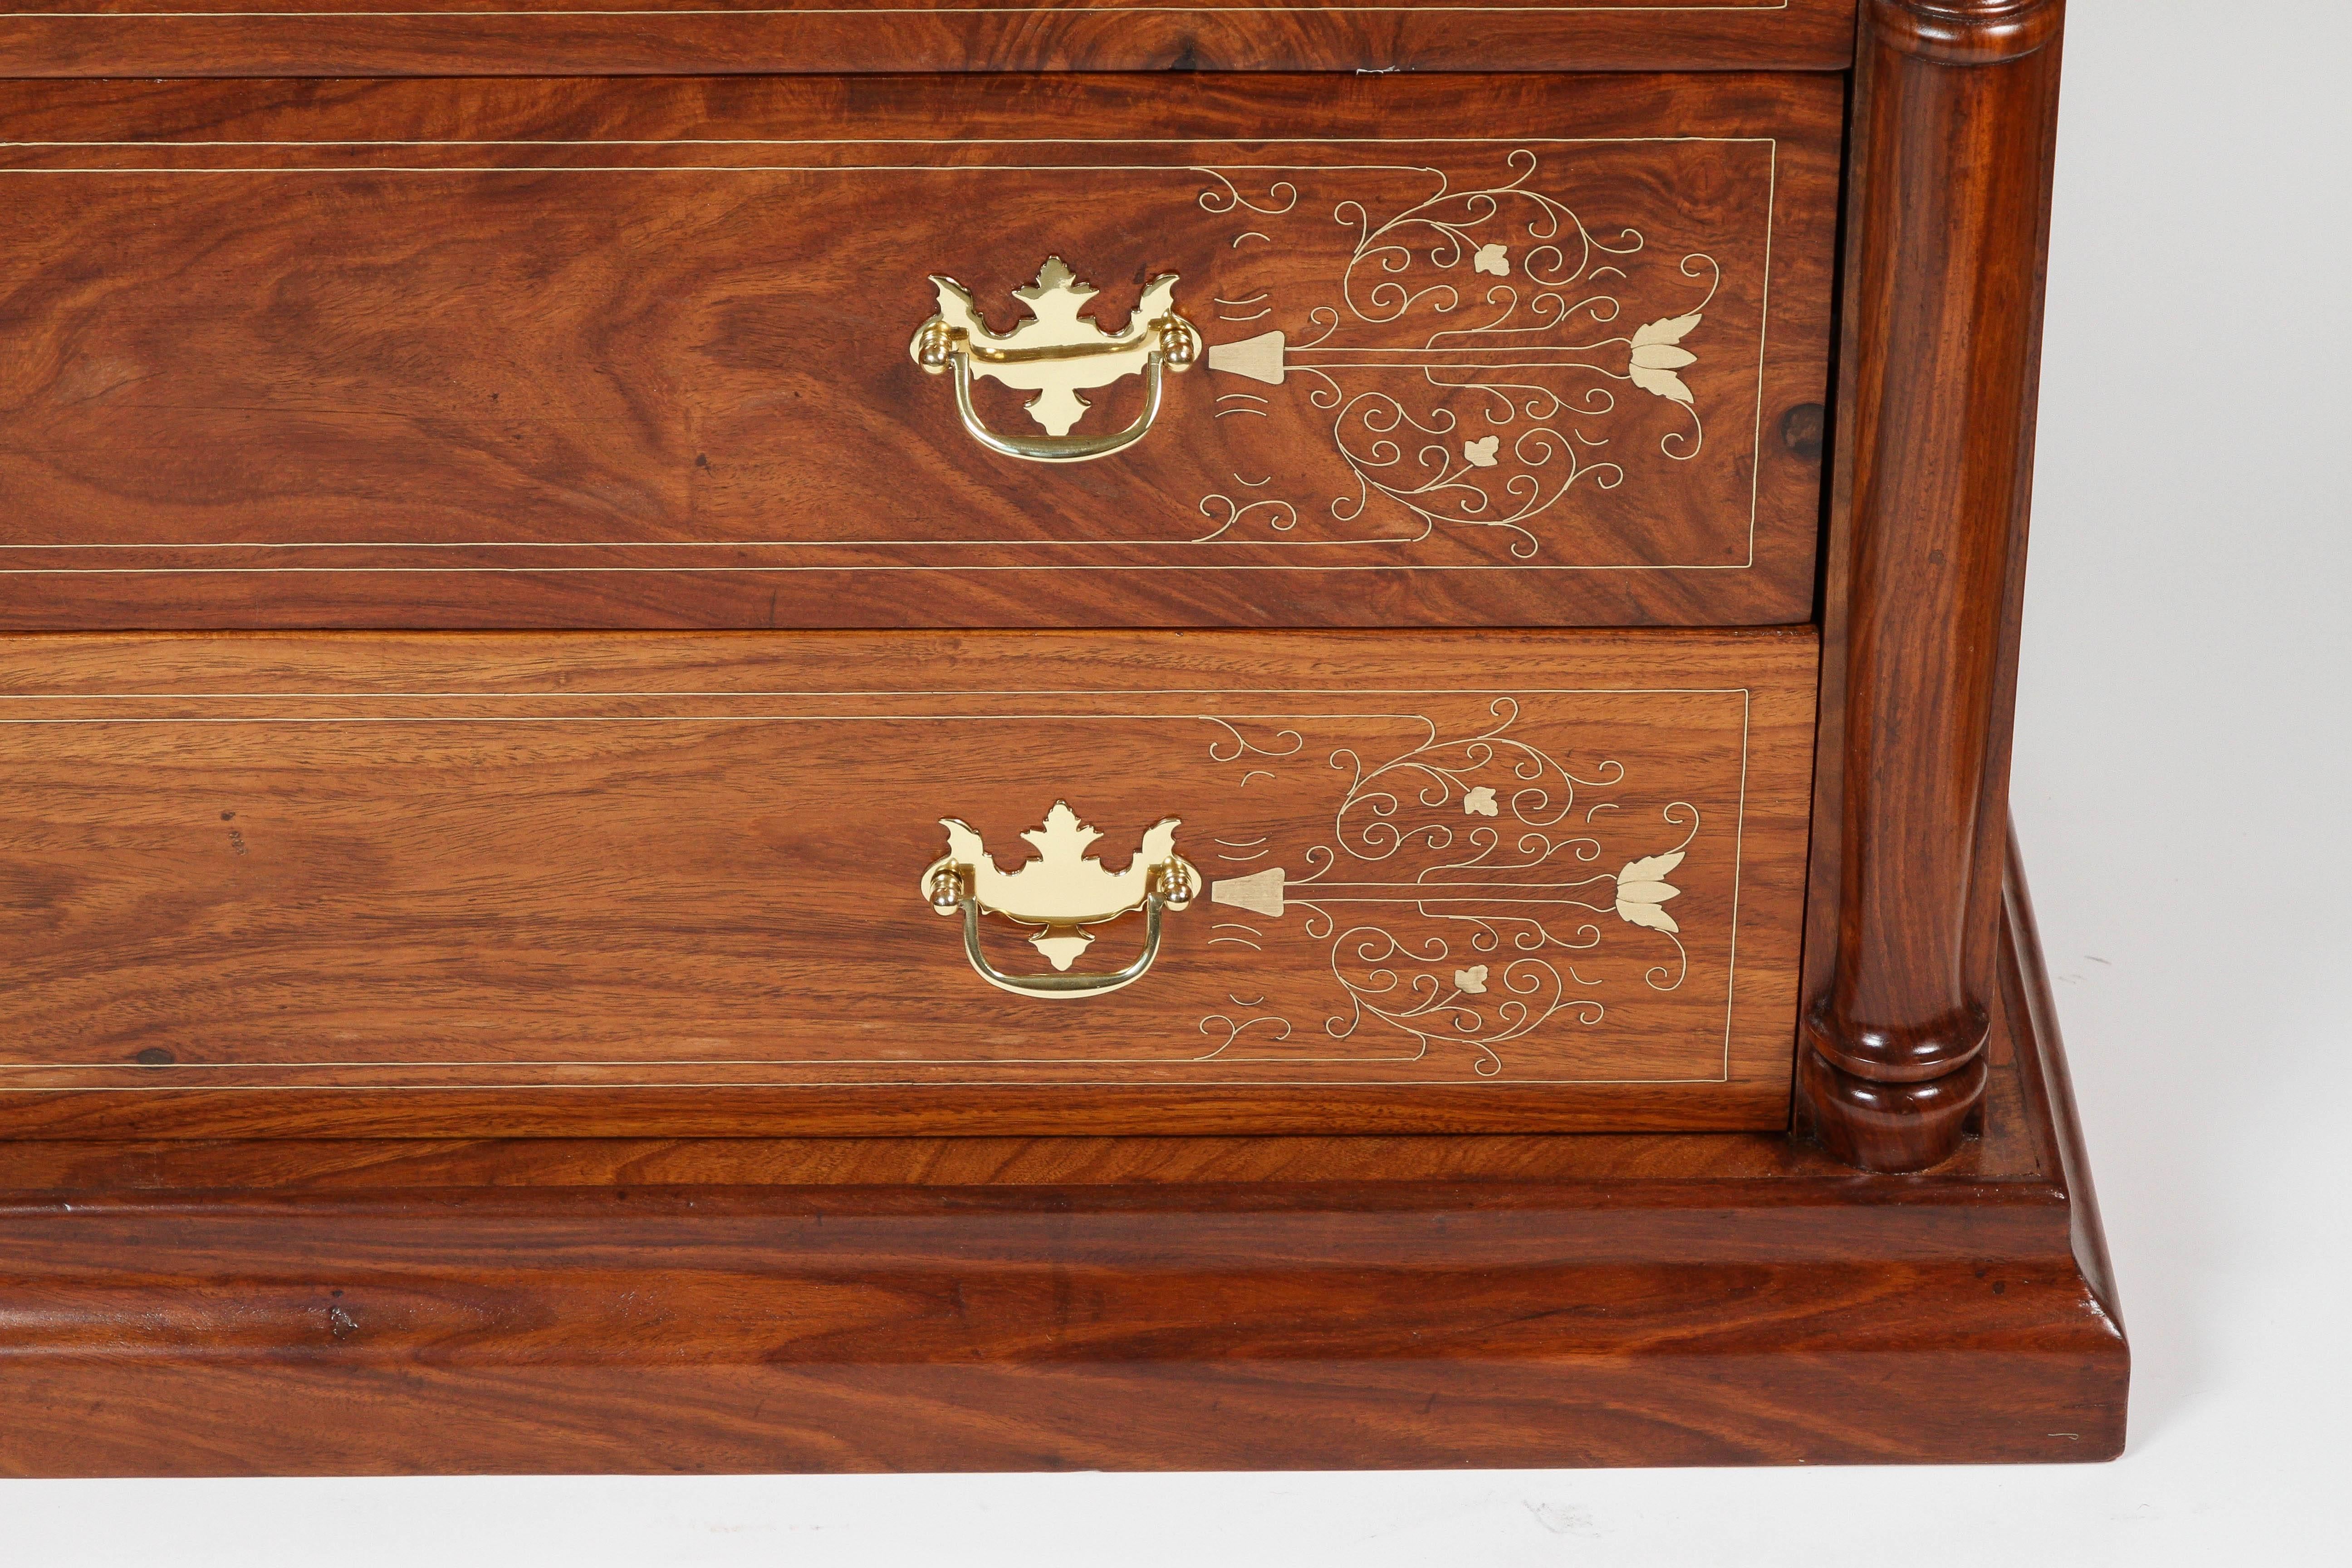 Vintage chest of drawers made from exotic wood with intricate brass inlay detail. All original brass hardware has been newly polished and the wood refinished (most likely from Asia).